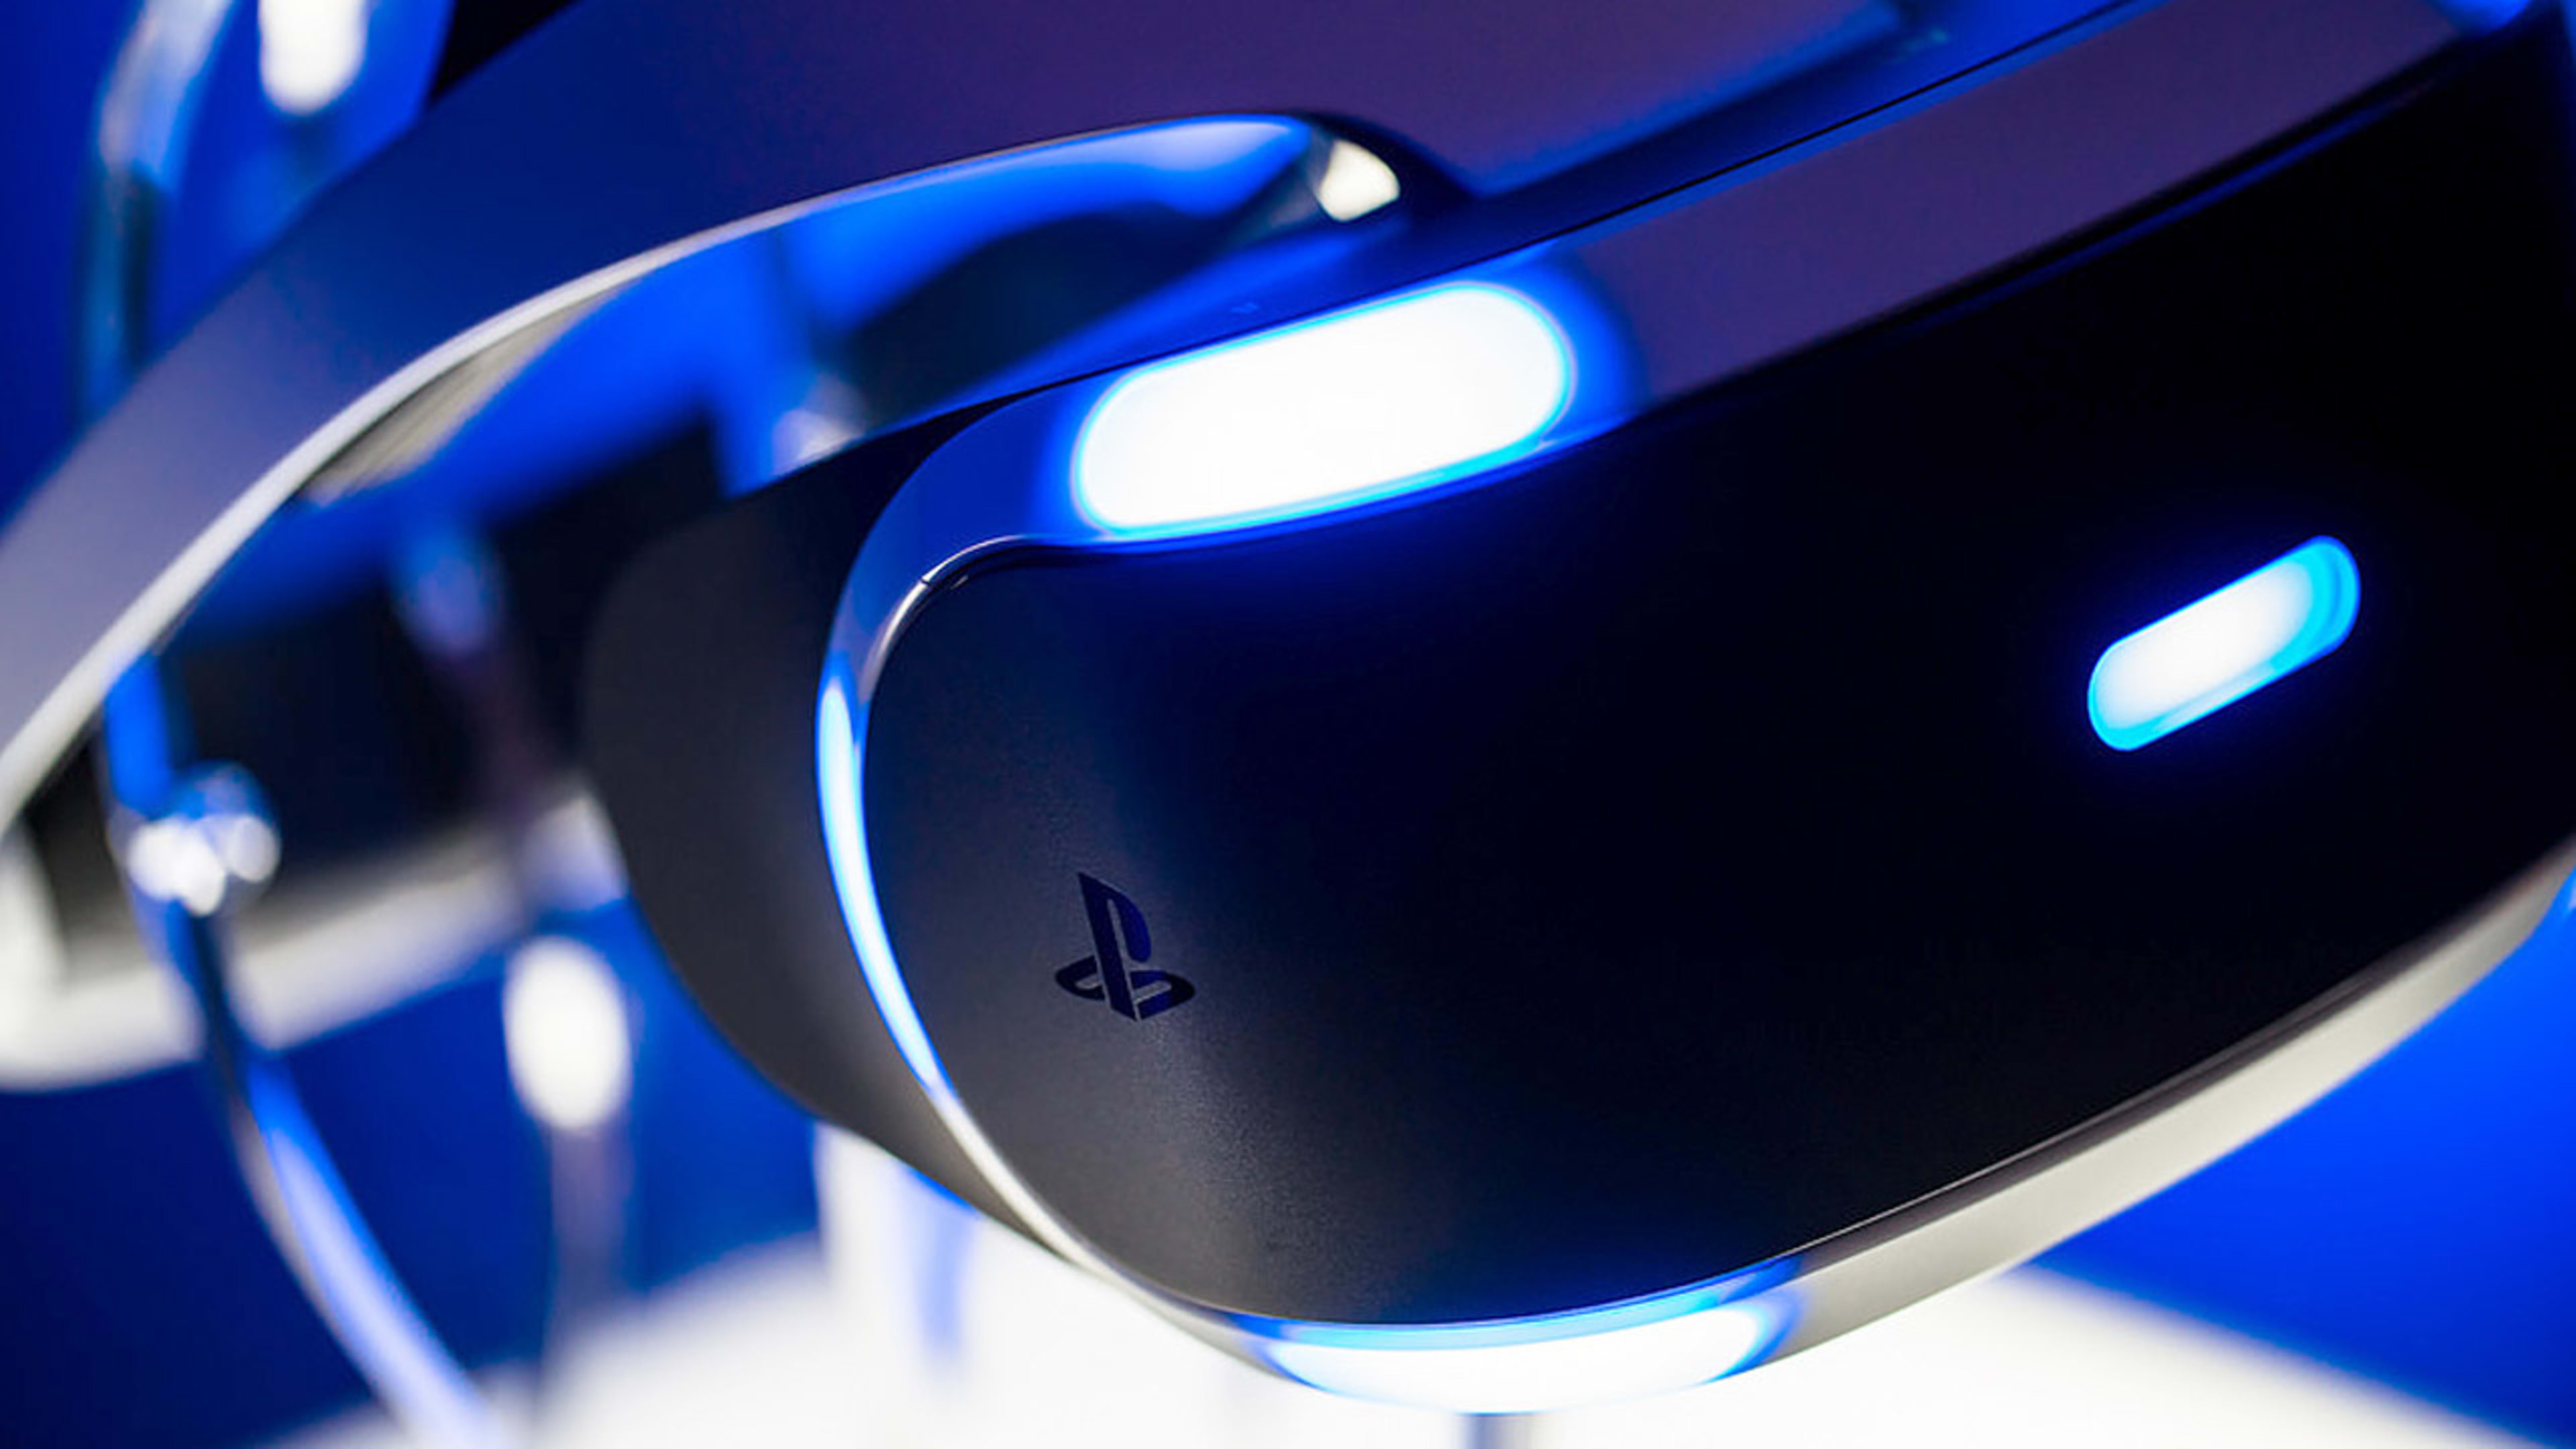 Sony’s PlayStation VR To Cost Less Than Oculus Rift, HTC Vive At Launch